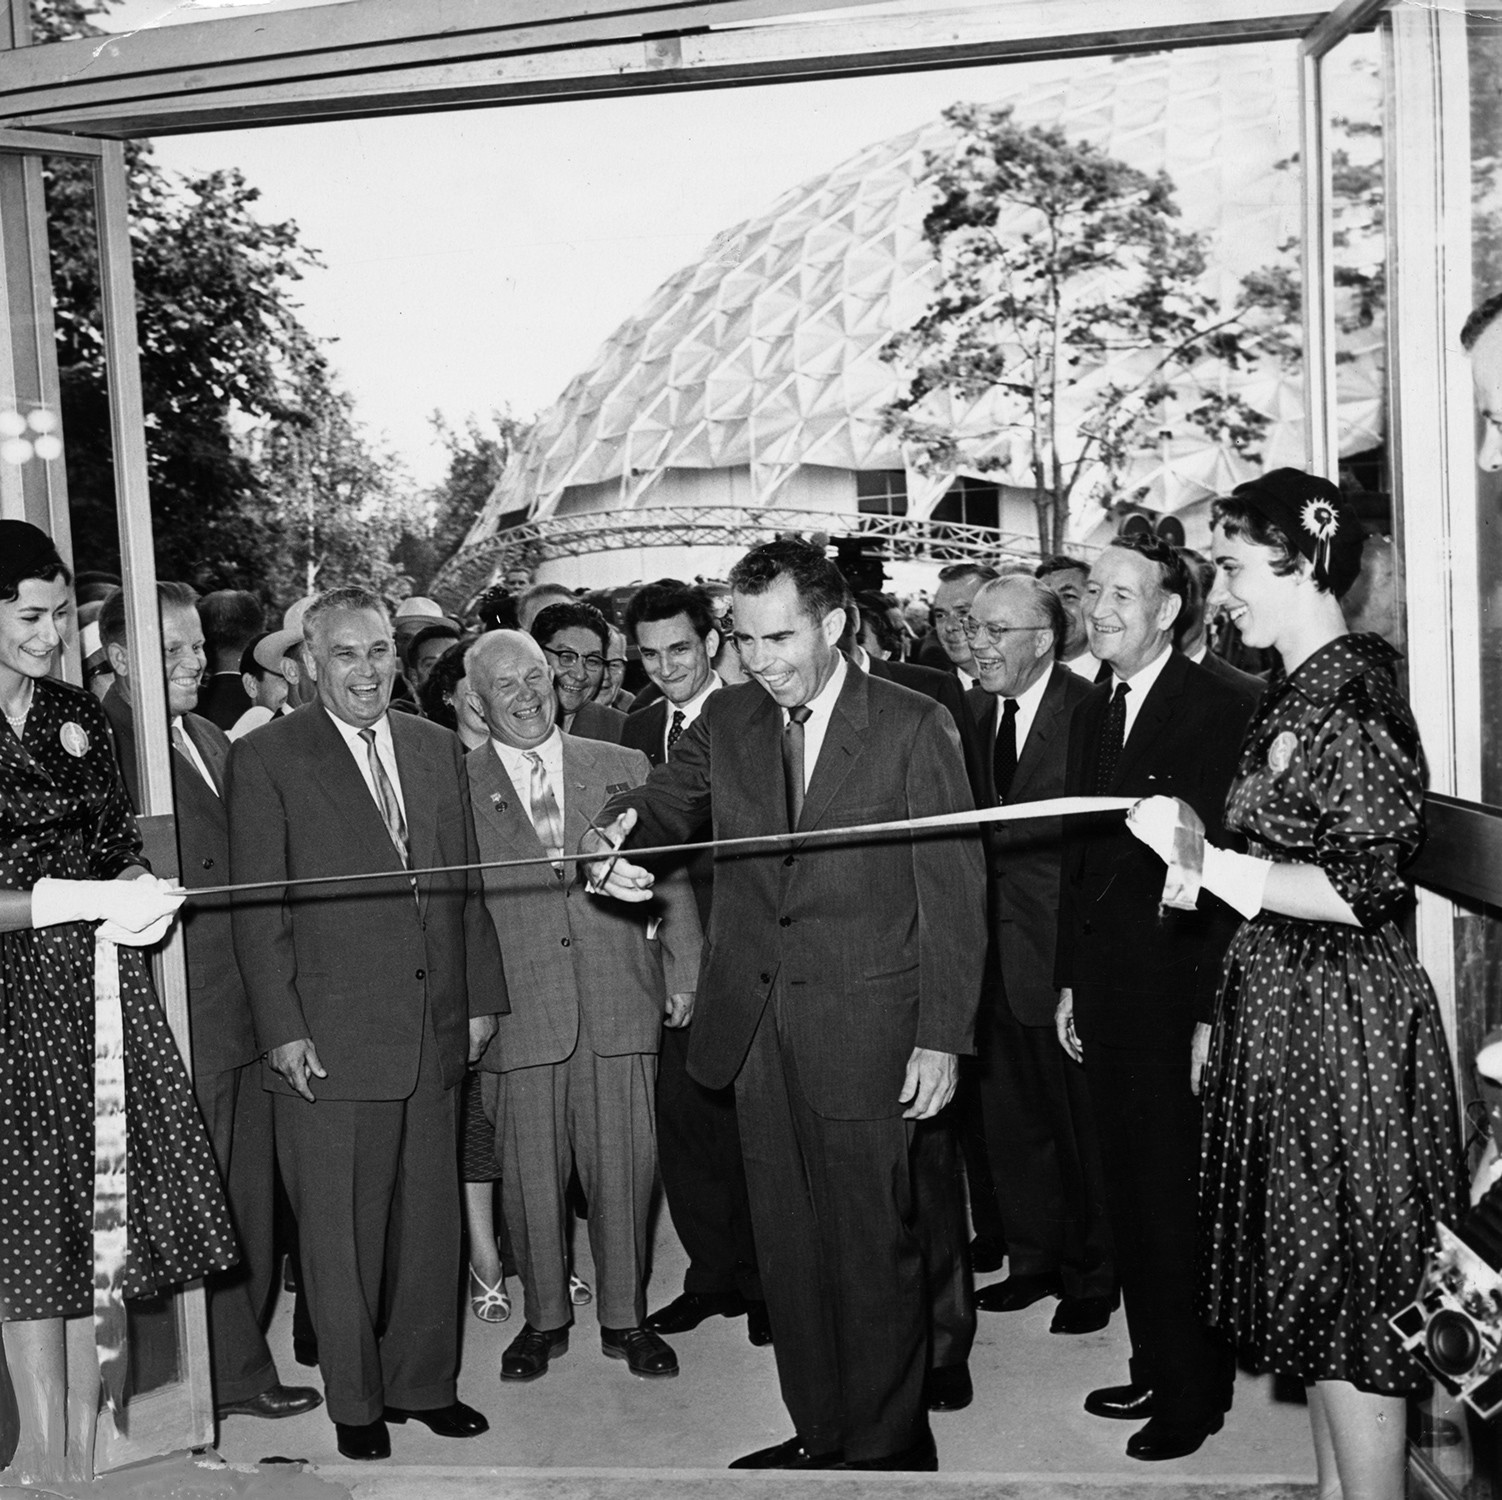 Richard Nixon cuts the ribbon, officially opening the exhibit.